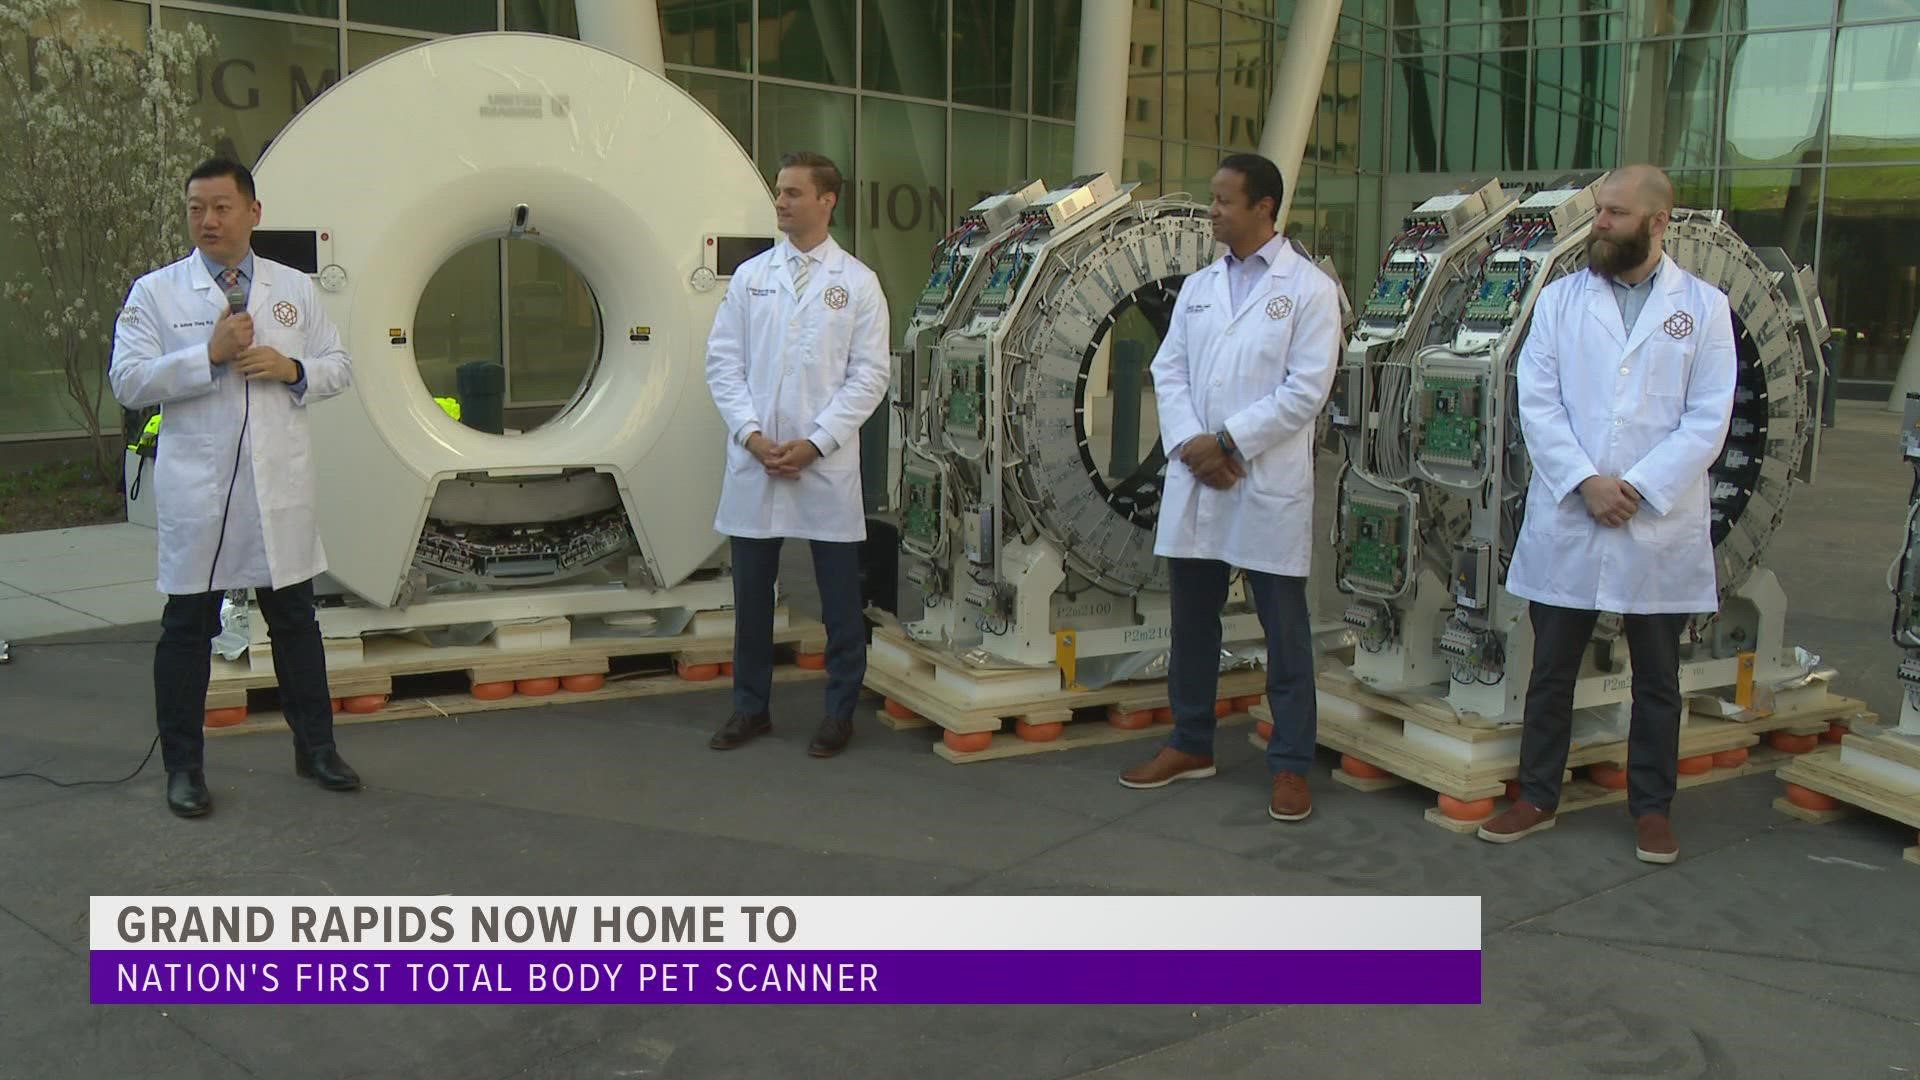 Grand Rapids is now home to one of the world's only total body PET Scanners.